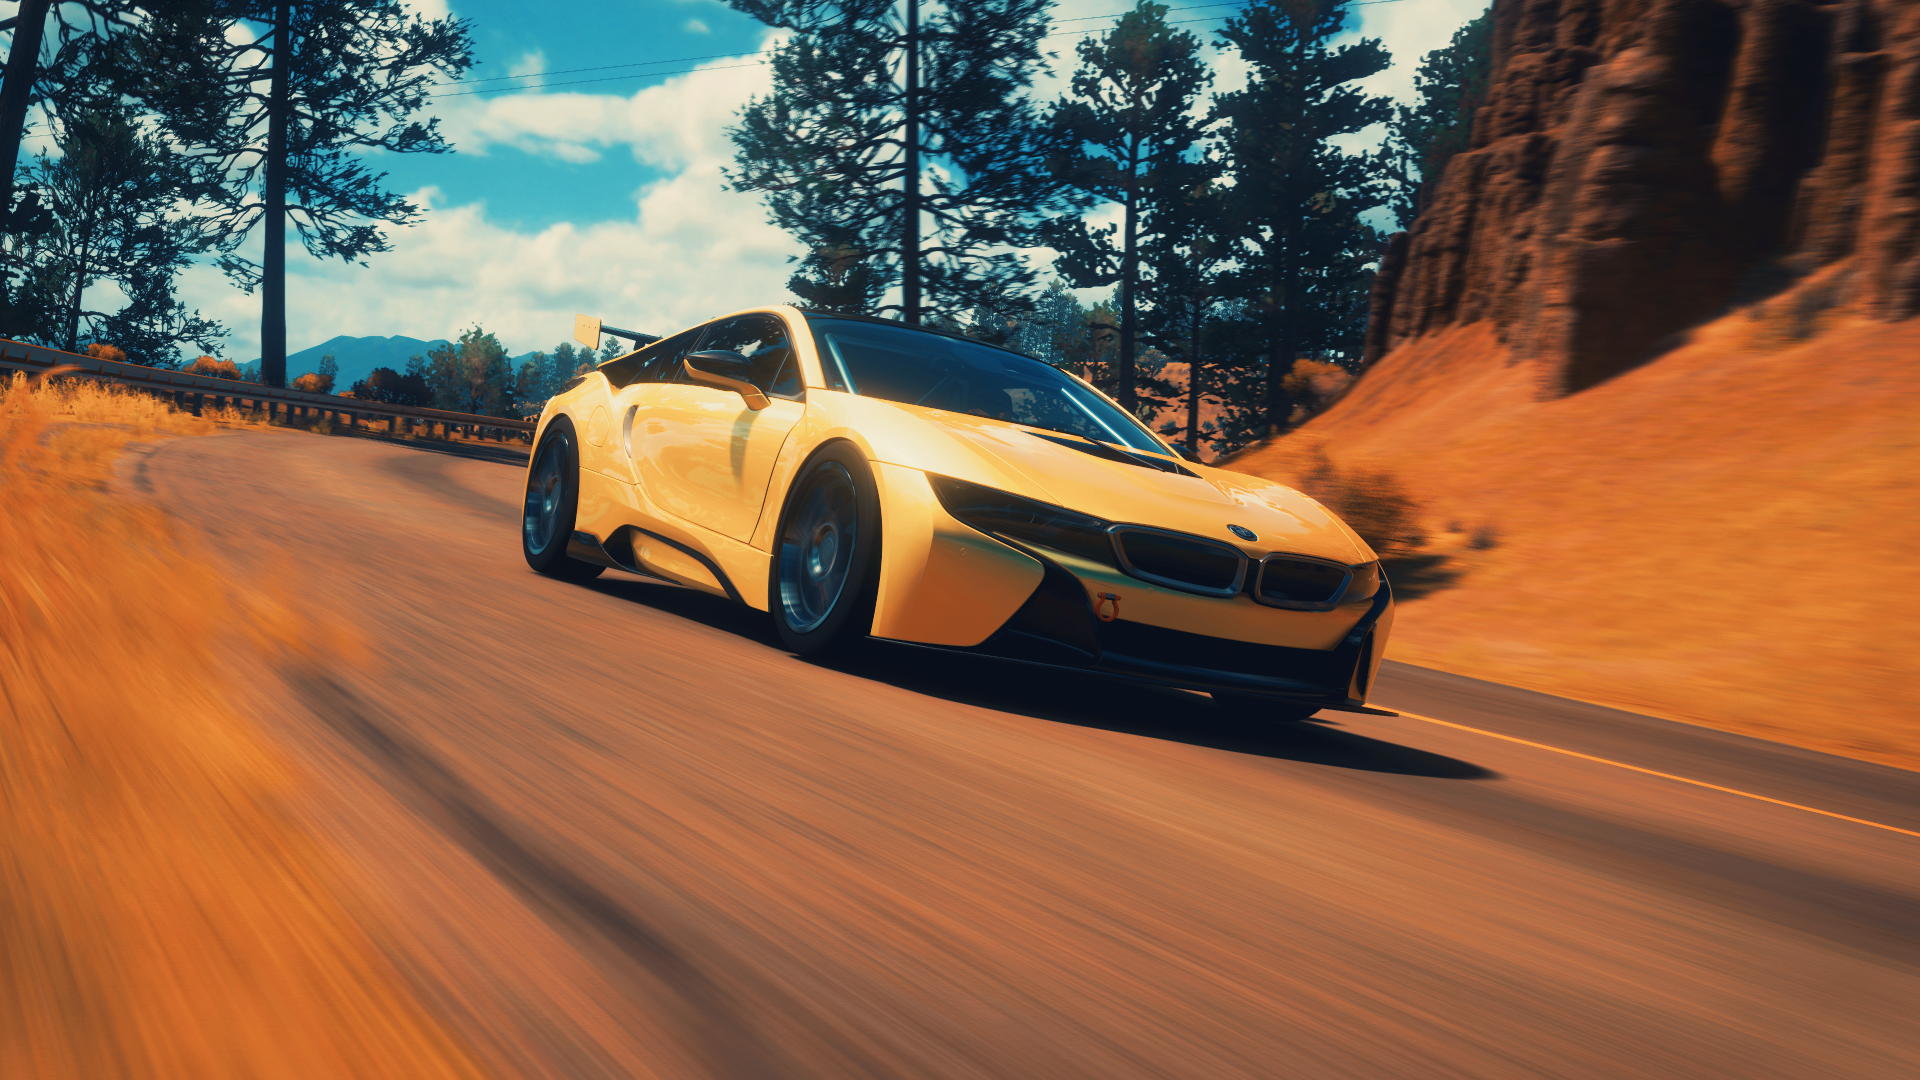 General 1920x1080 Forza Forza Horizon 5 BMW BMW i8 car vehicle road yellow hybrid (car) German cars Xbox Game Studios sky clouds PlaygroundGames video games trees frontal view motion blur blurred yellow cars driving sunlight